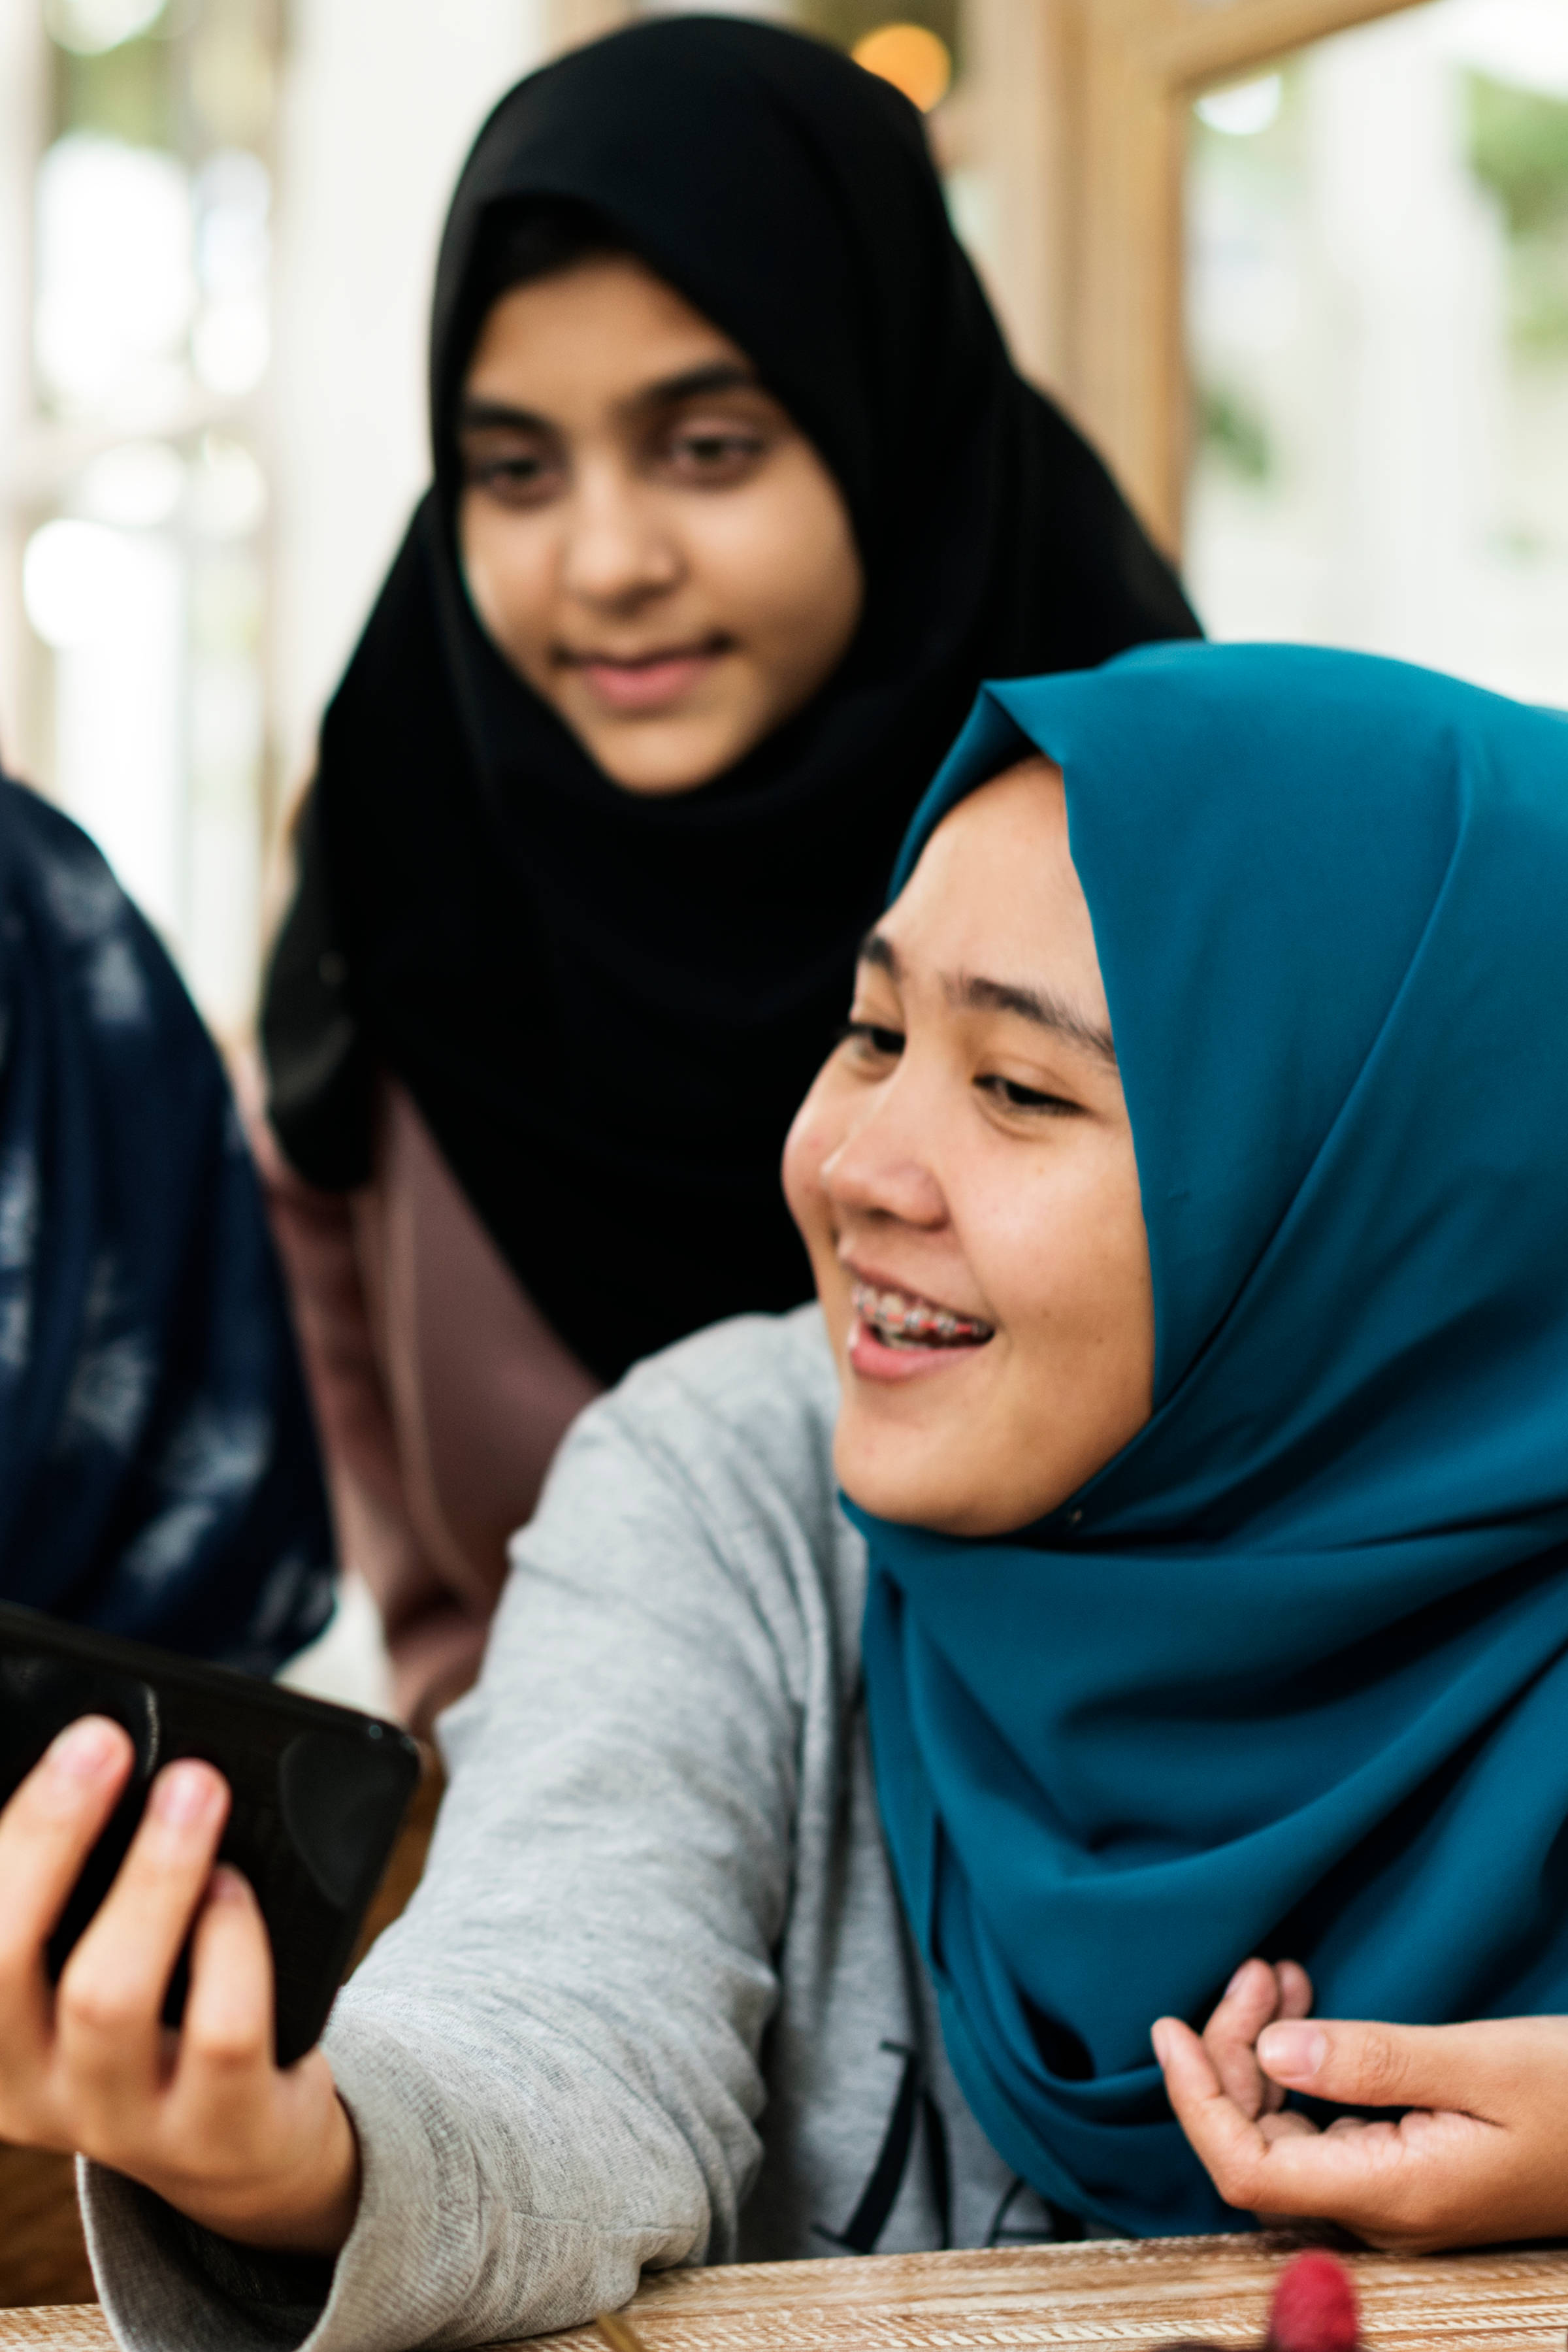 Women looking at a mobile phone. Photo: Rawpixel / iStock.